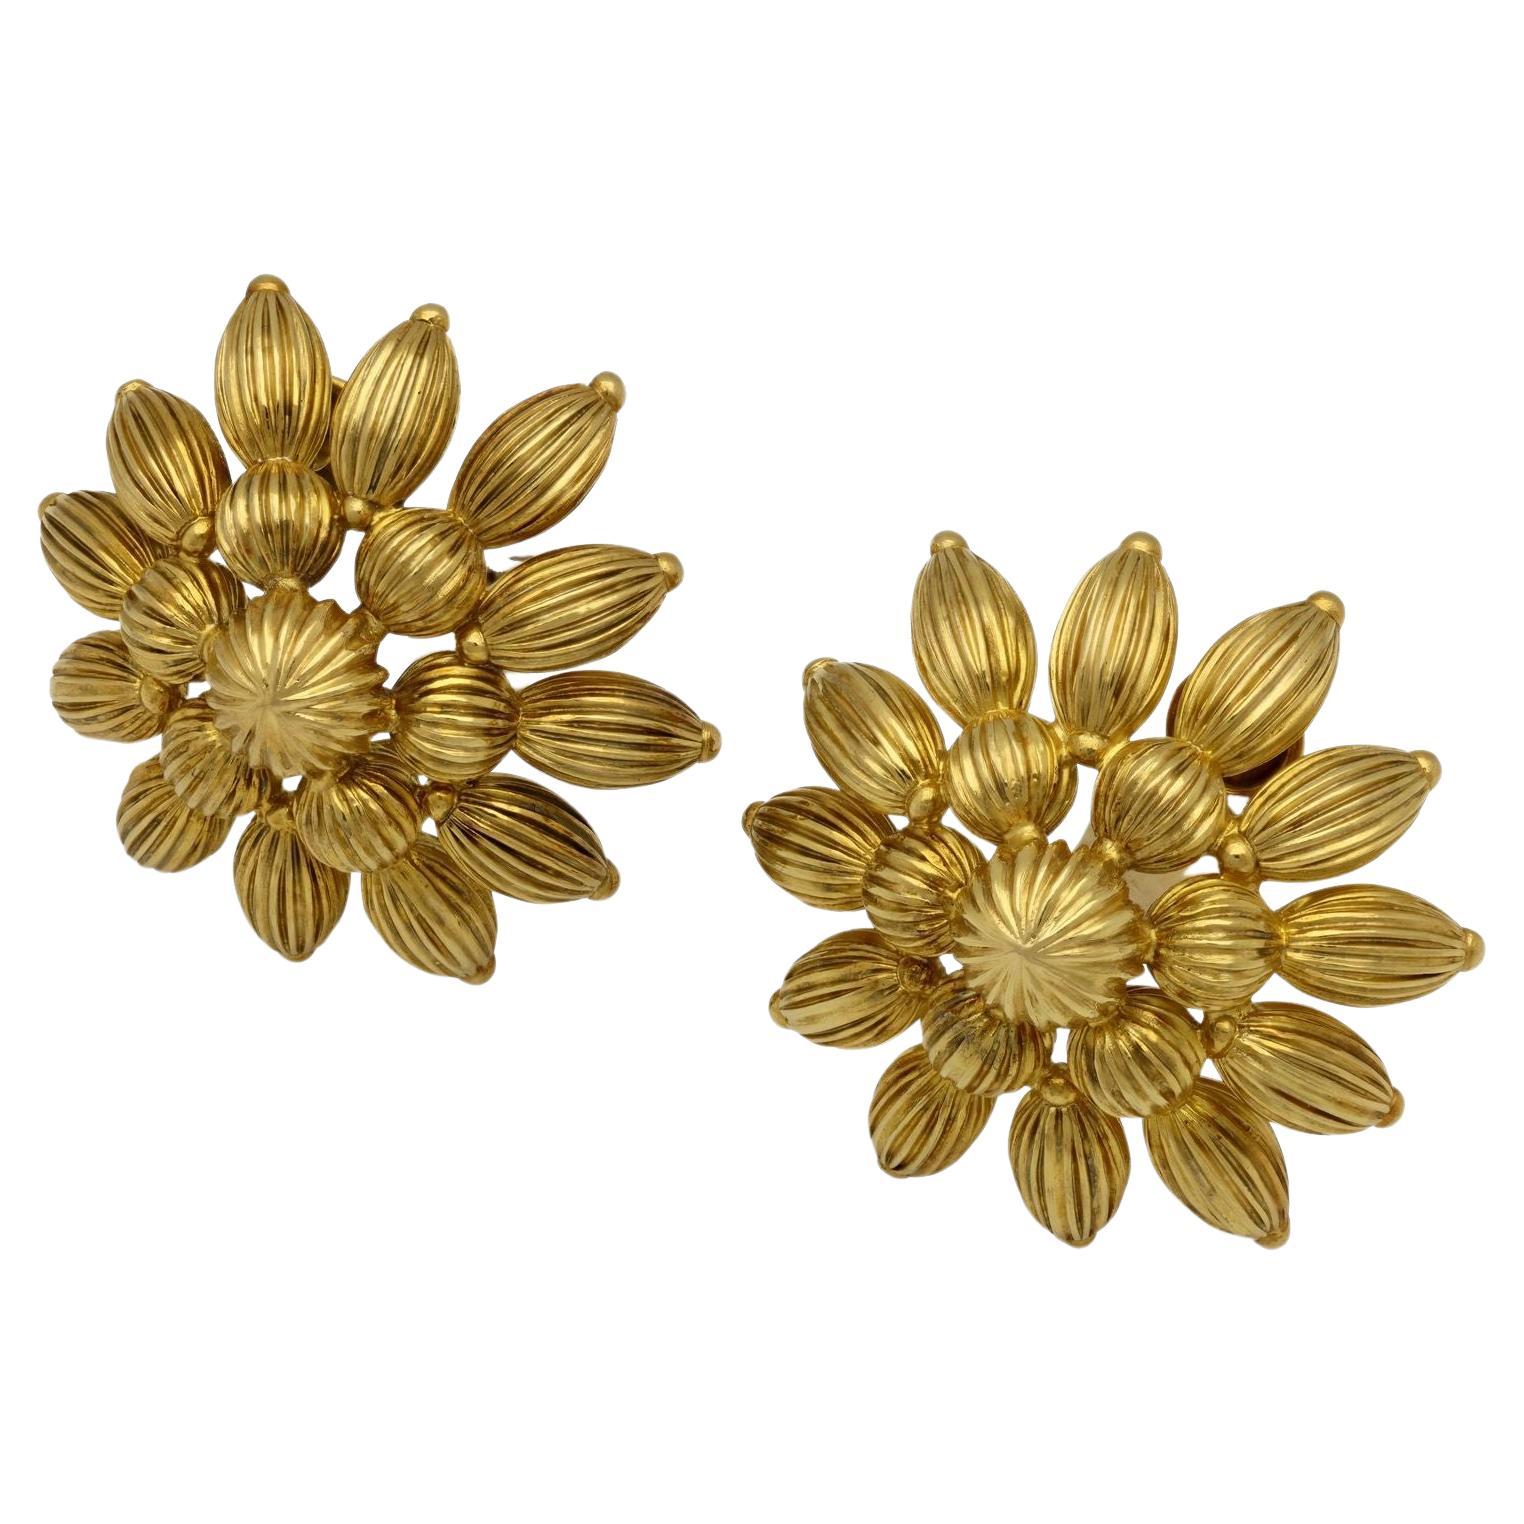 Ilias Lalaounis 'Byzantine' Earrings in 18 Carat Gold, circa 1970s